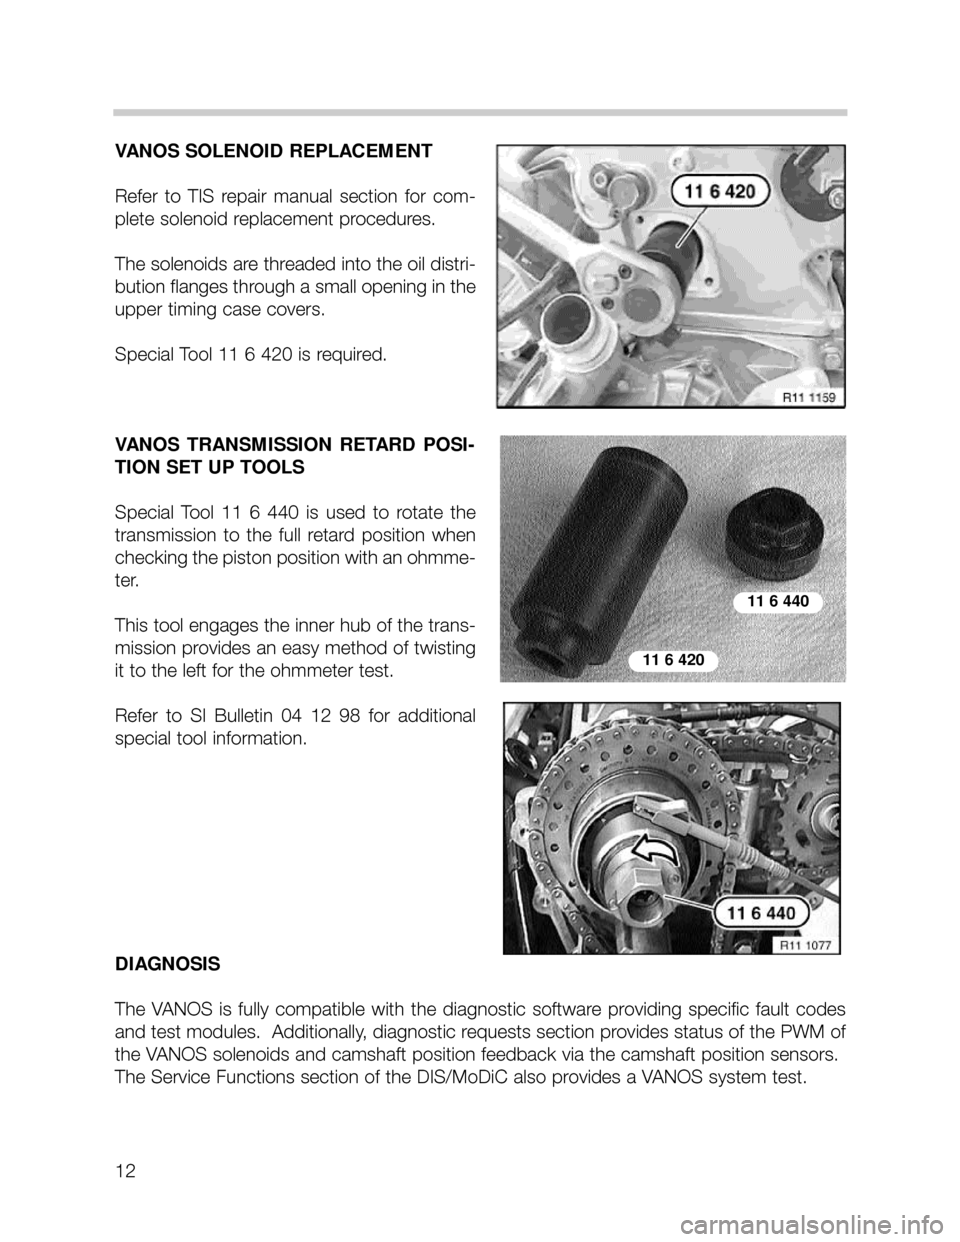 BMW X5 2005 E53 M62TU Engine User Guide 12
VANOS SOLENOID REPLACEMENT
Refer  to  TIS  repair  manual  section  for  com-
plete solenoid replacement procedures.  
The solenoids are threaded into the oil distri-
bution flanges through a small